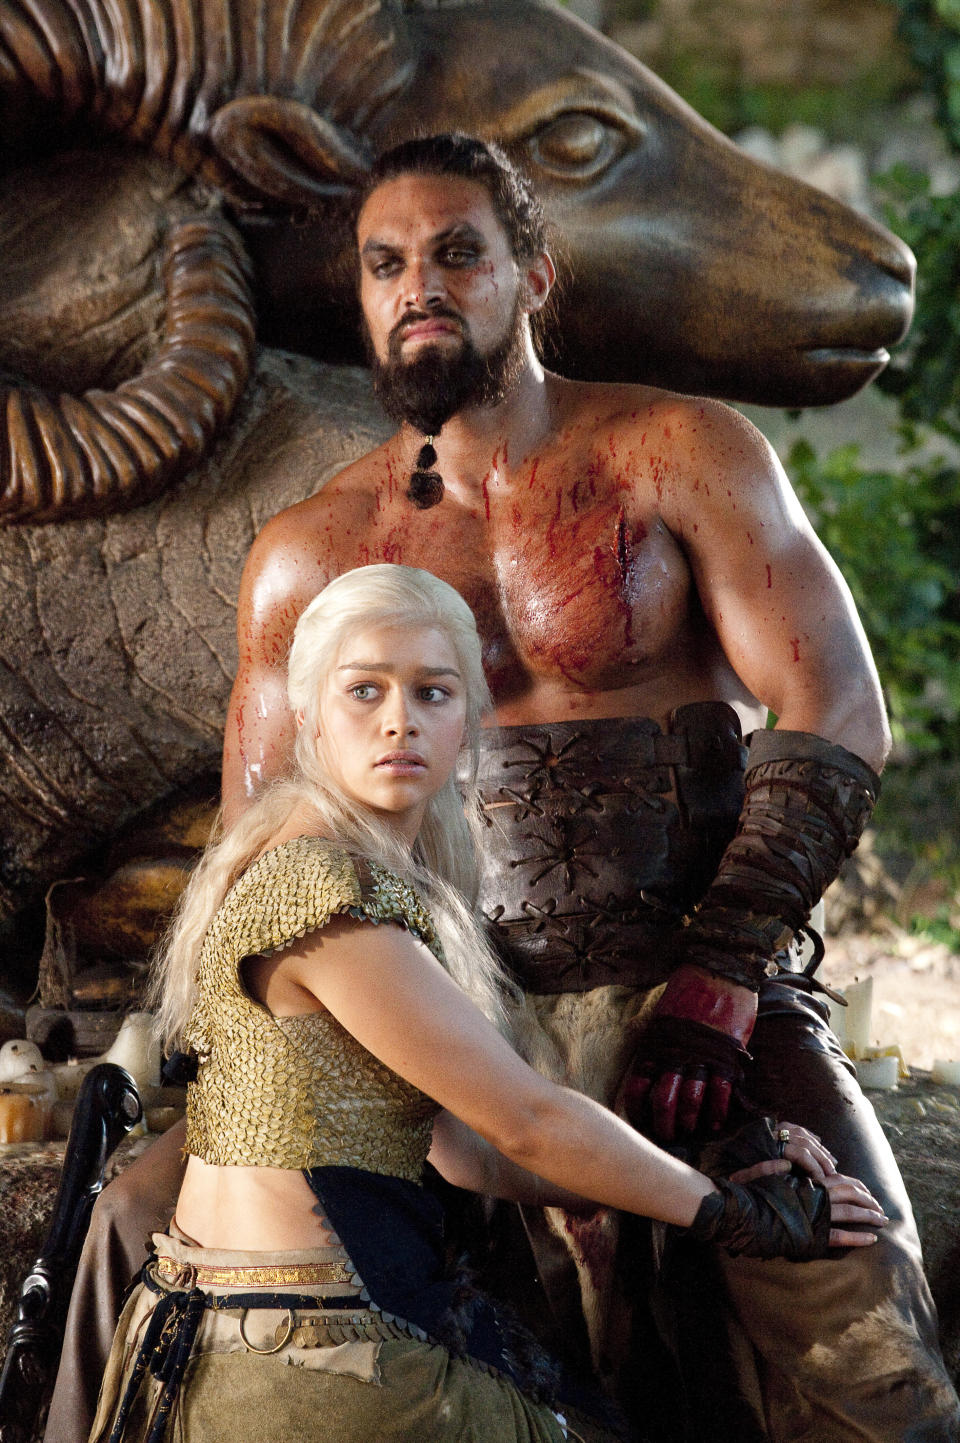 Emilia Clarke as Daenerys, Jason Momoa as Khal Drogo in <i>Game of Thrones</i>. (©2016 Home Box Office, Inc. All rights reserved.)